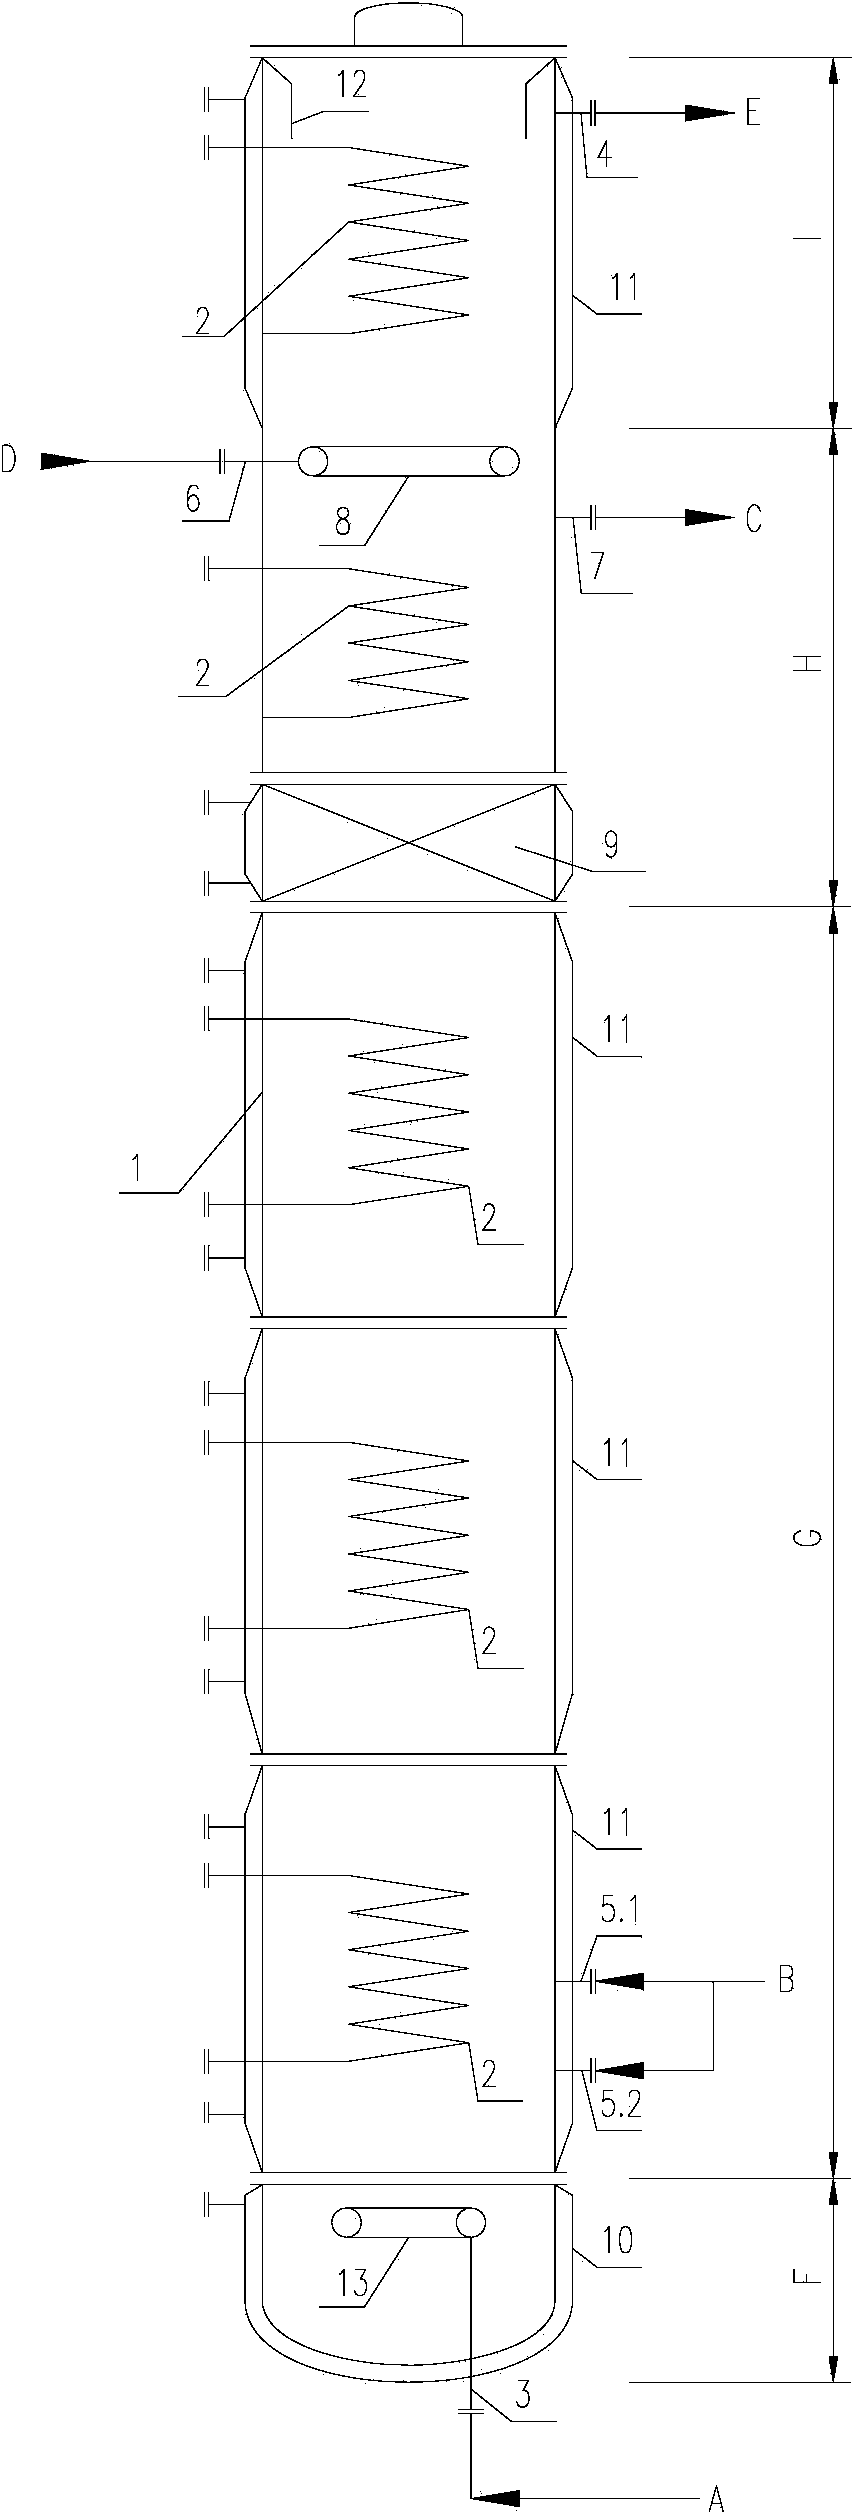 Thioether oxidation tower for producing dimethyl sulfoxide